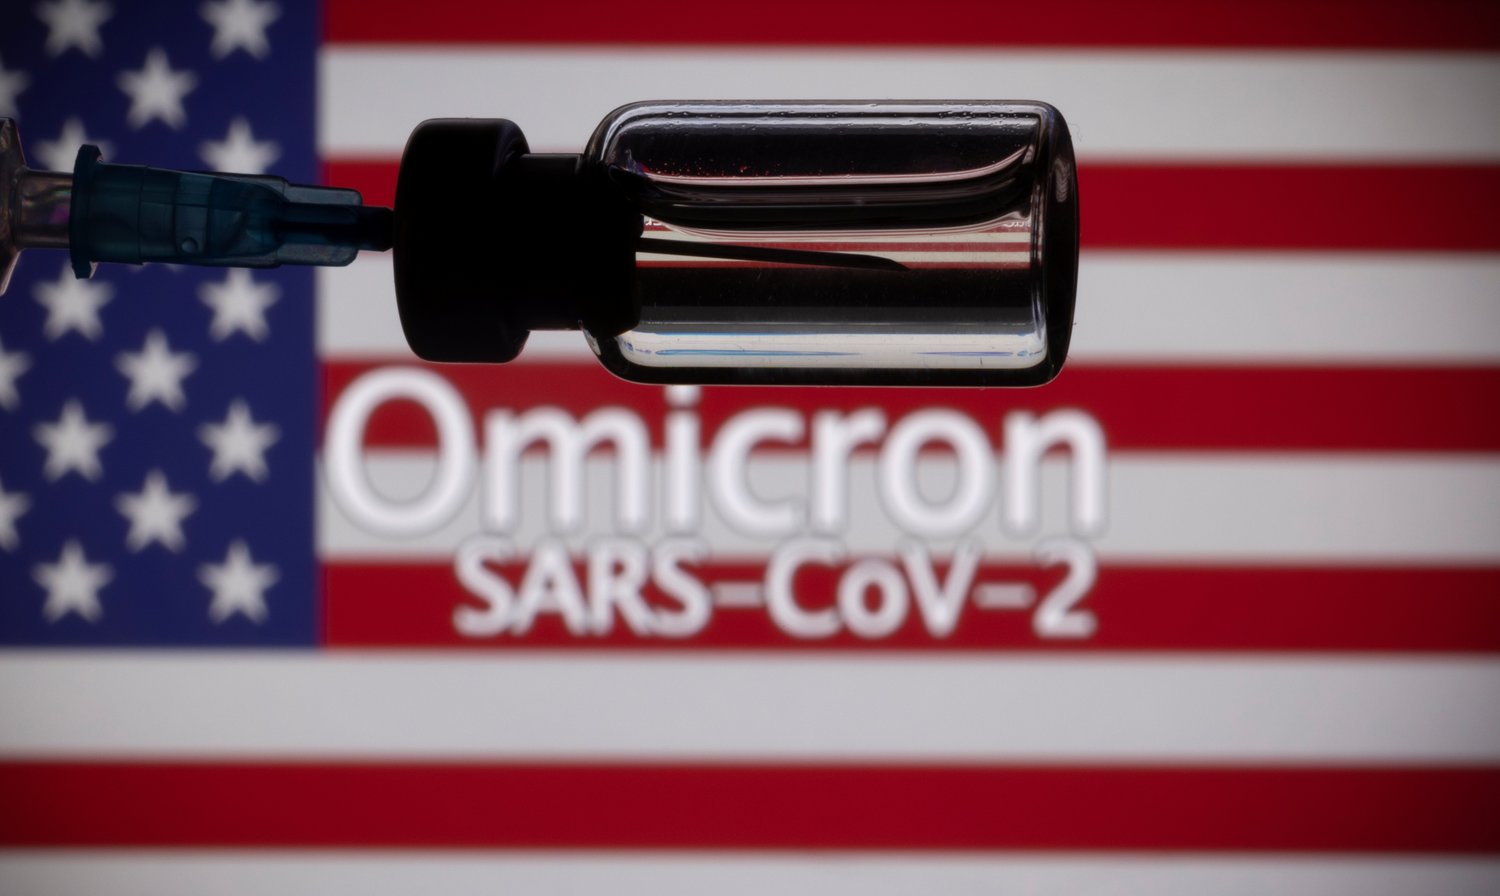 A vial, syringe and U.S. flag are seen in this Omnicron coronavirus illustration photo.